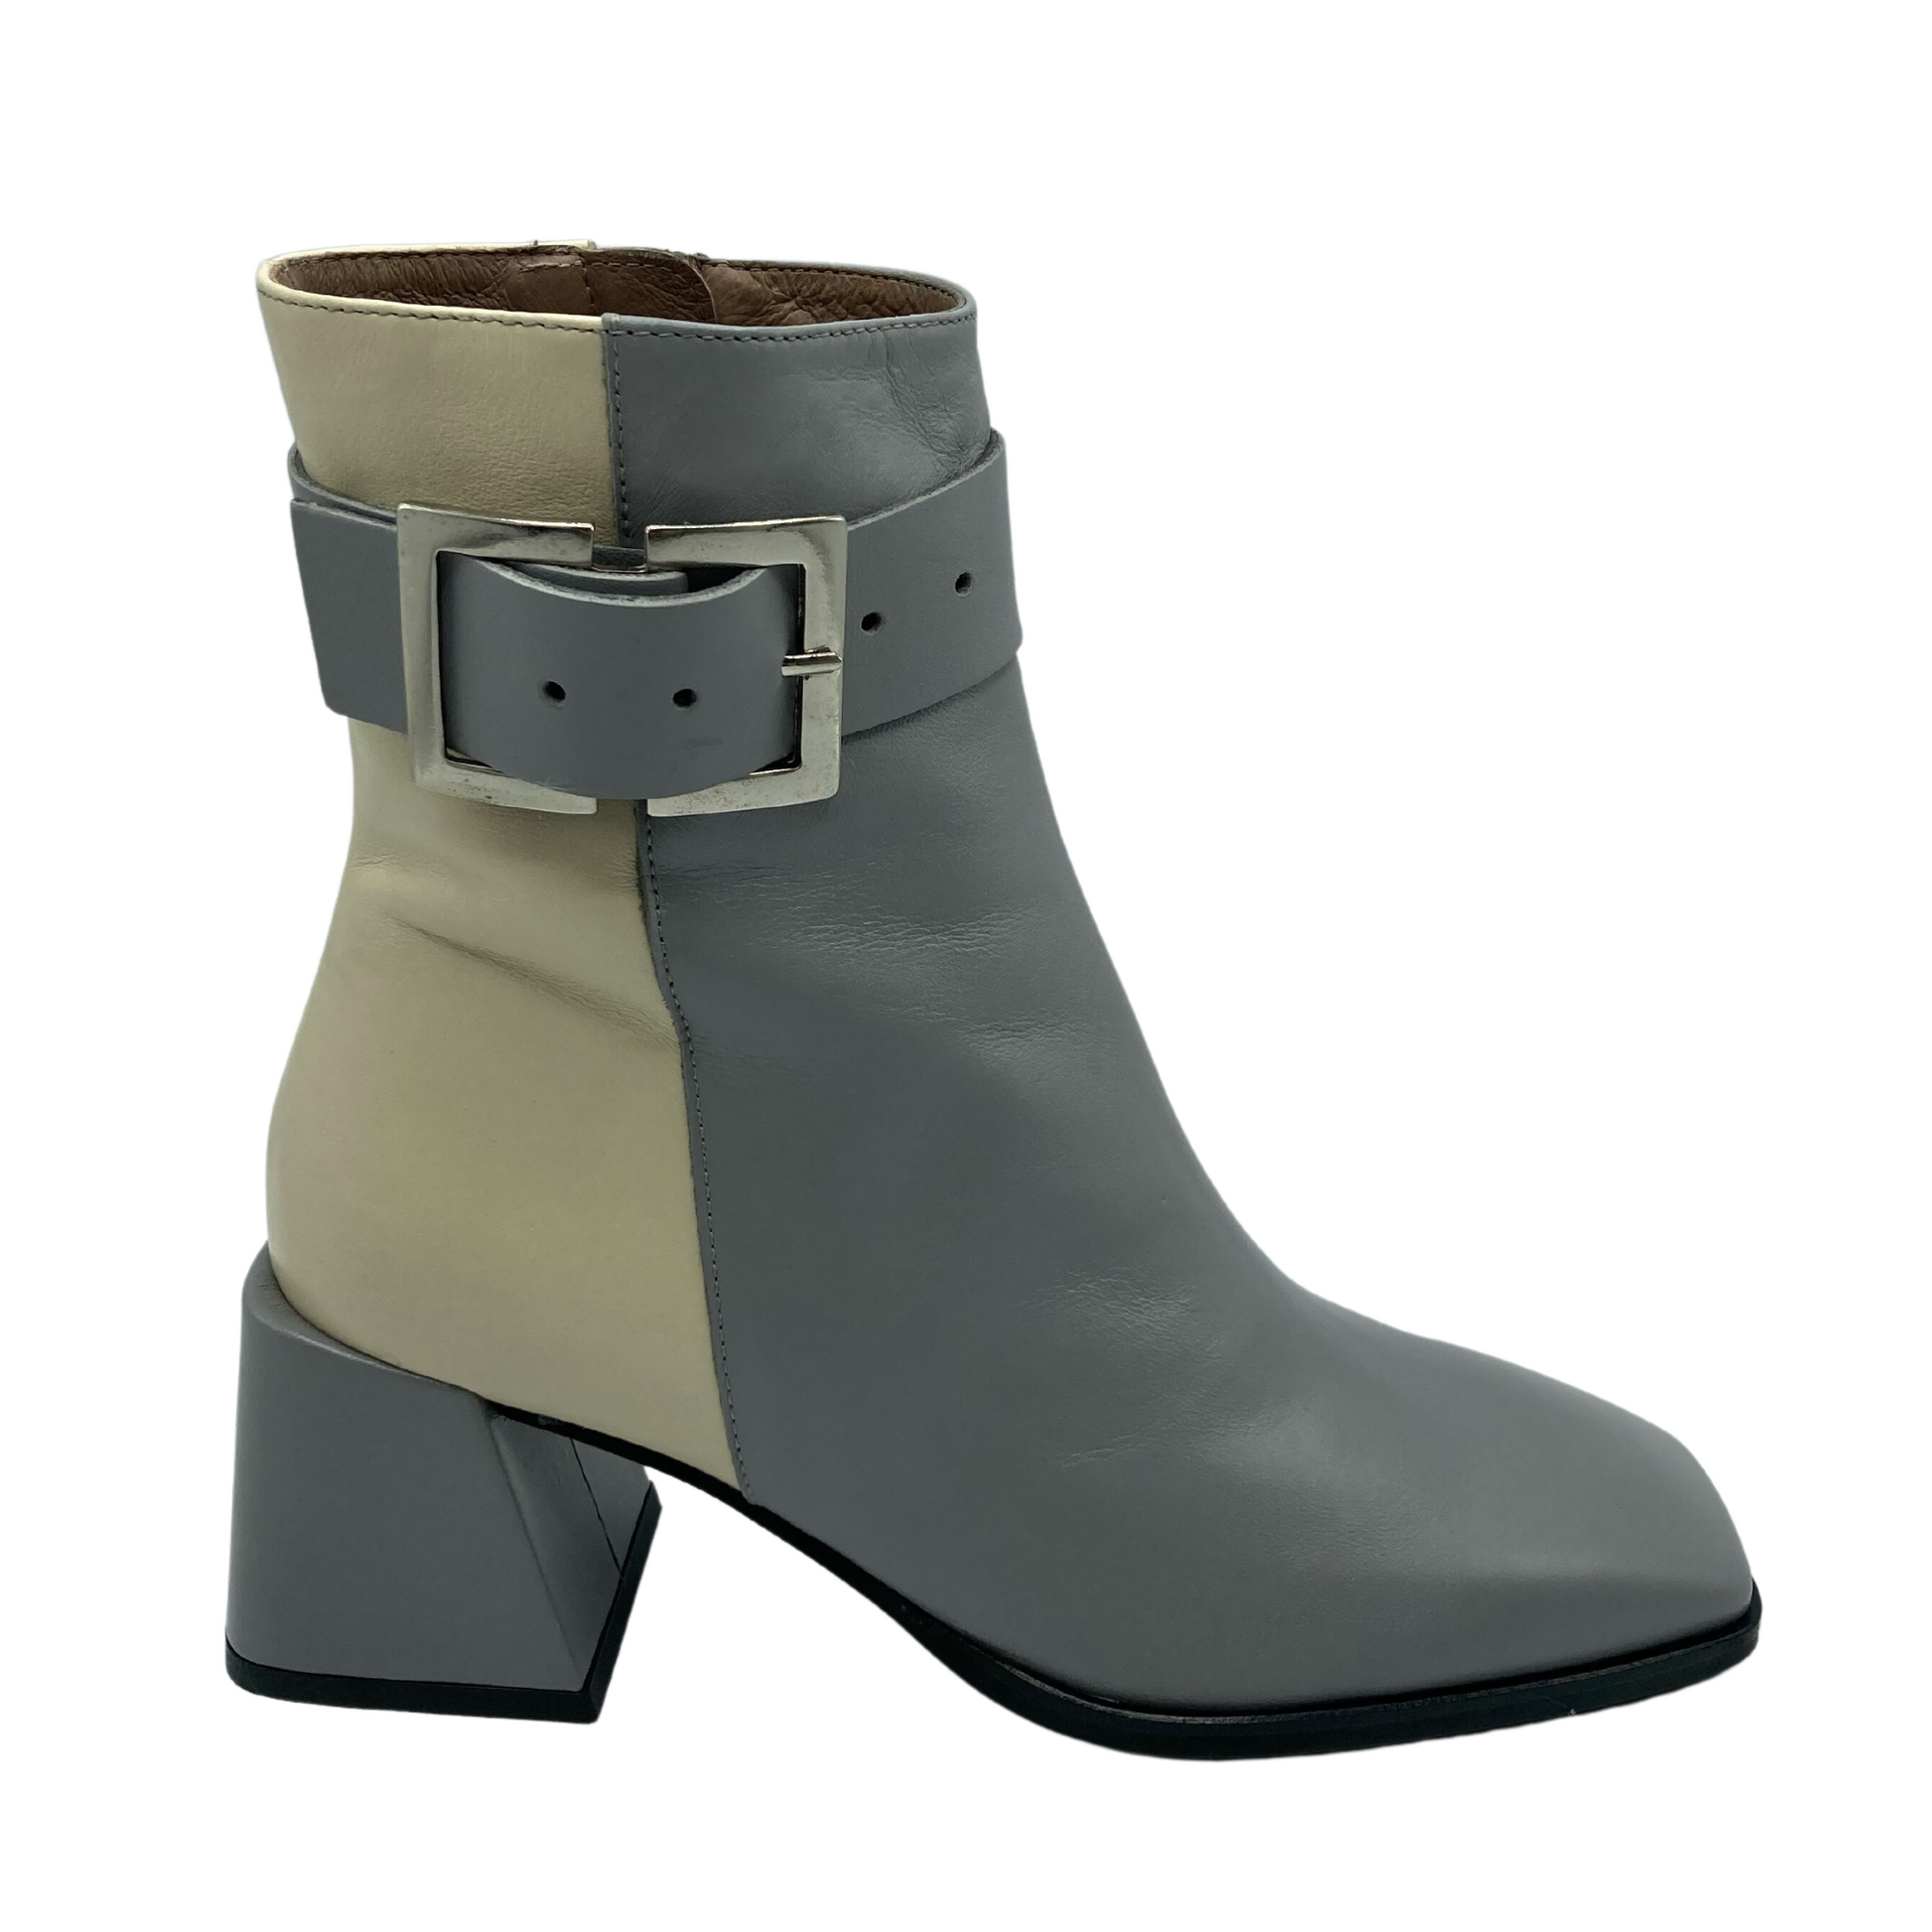 Profile view of chunky heeled, two toned boot